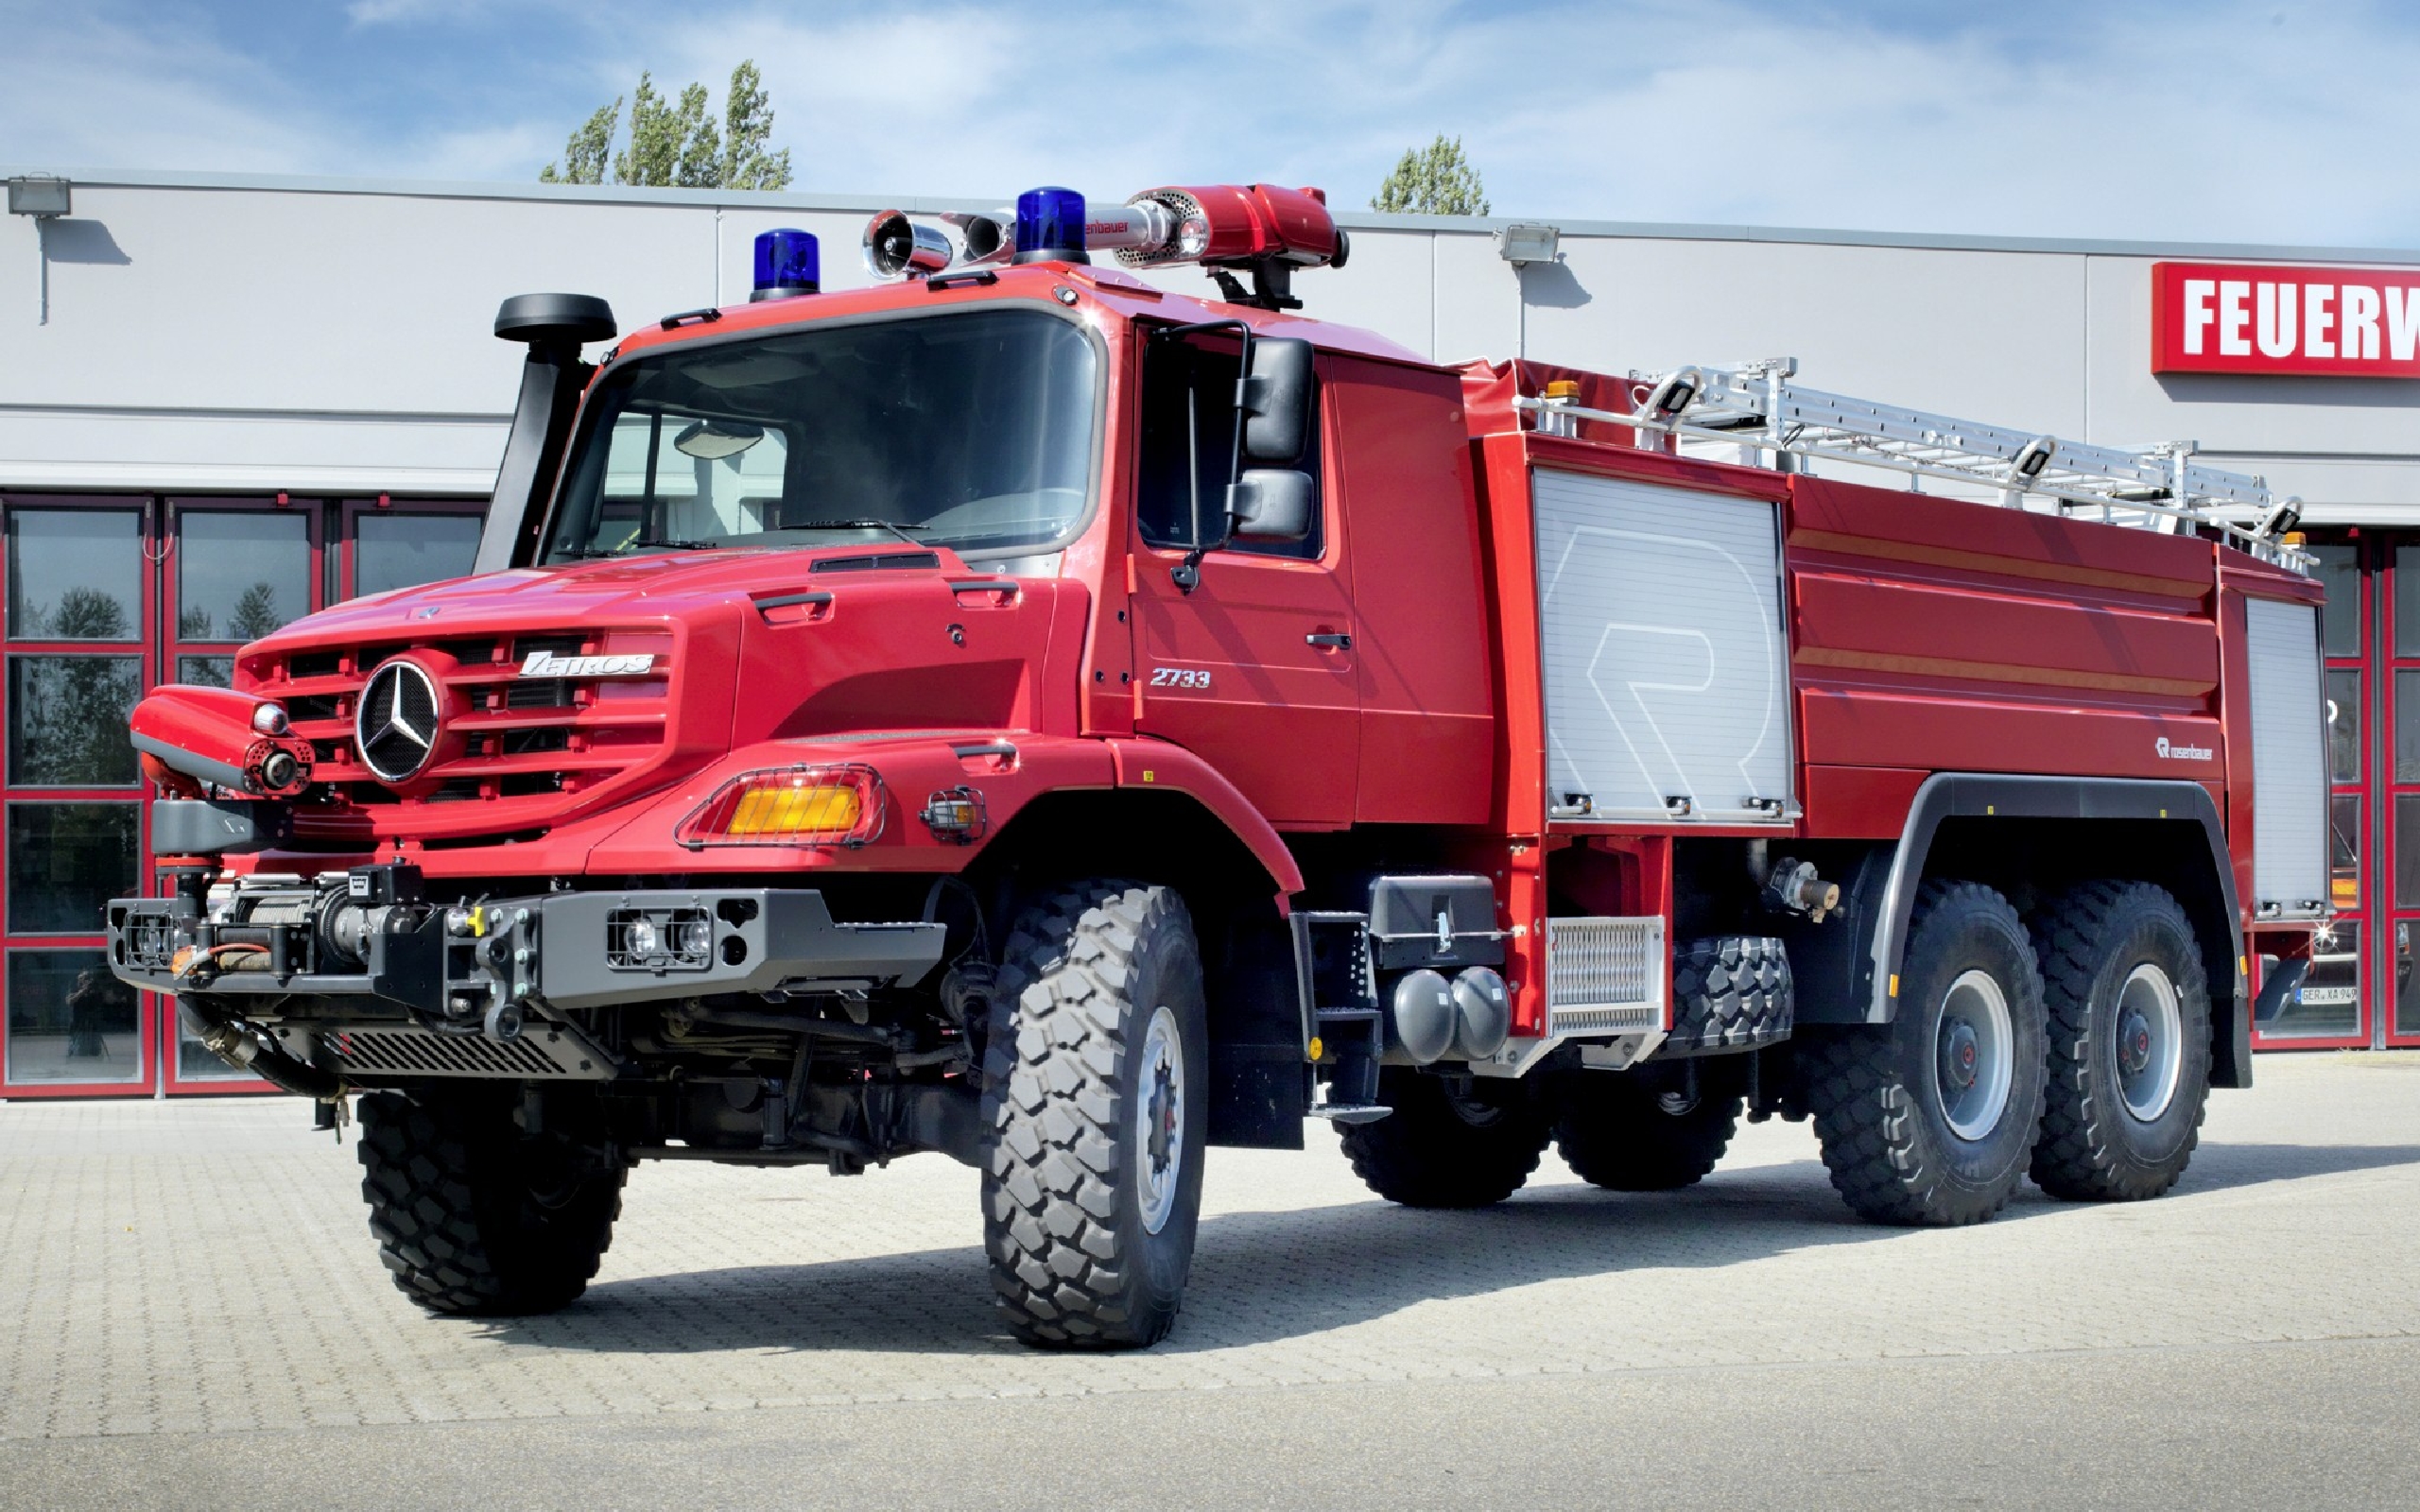 Fire Truck Wallpaper Pictures